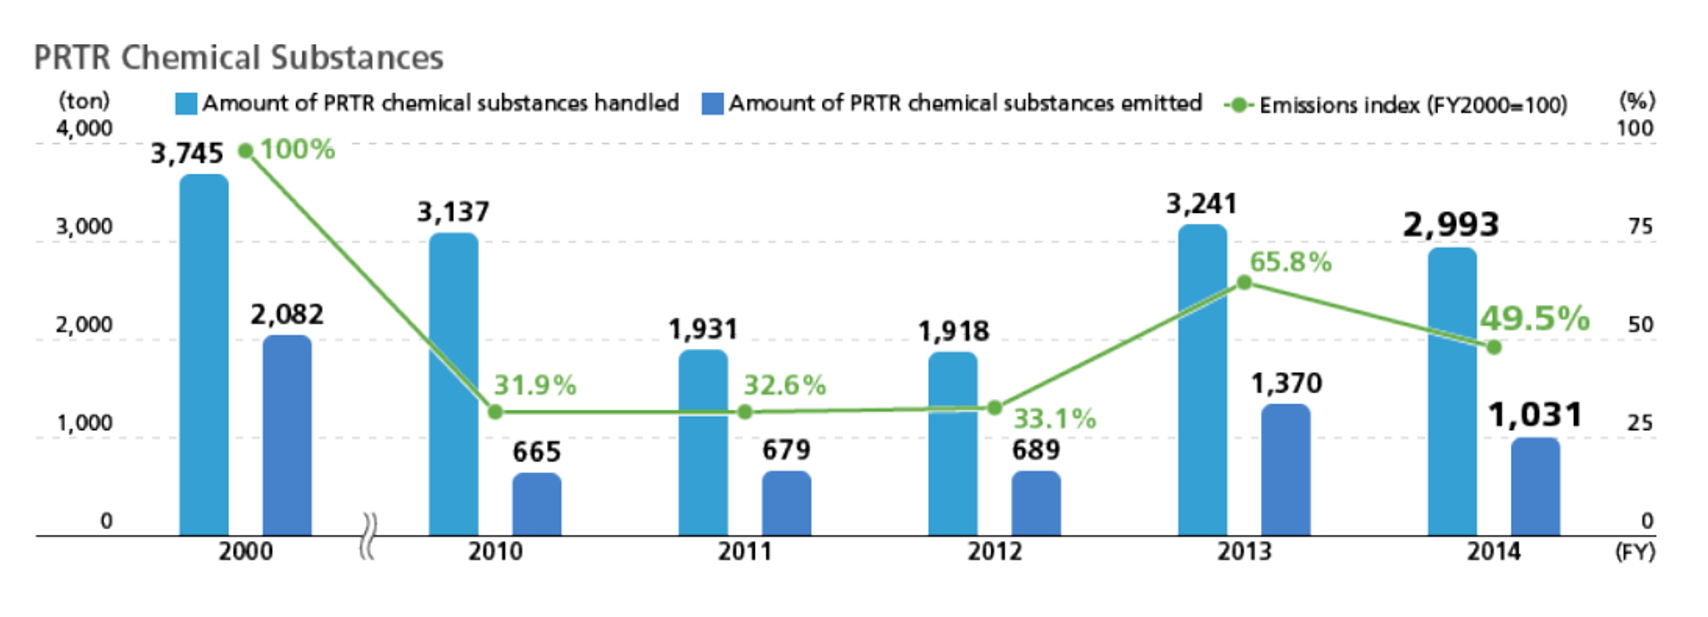 PRTR Chemical Substances Graph. See text version below for more details.